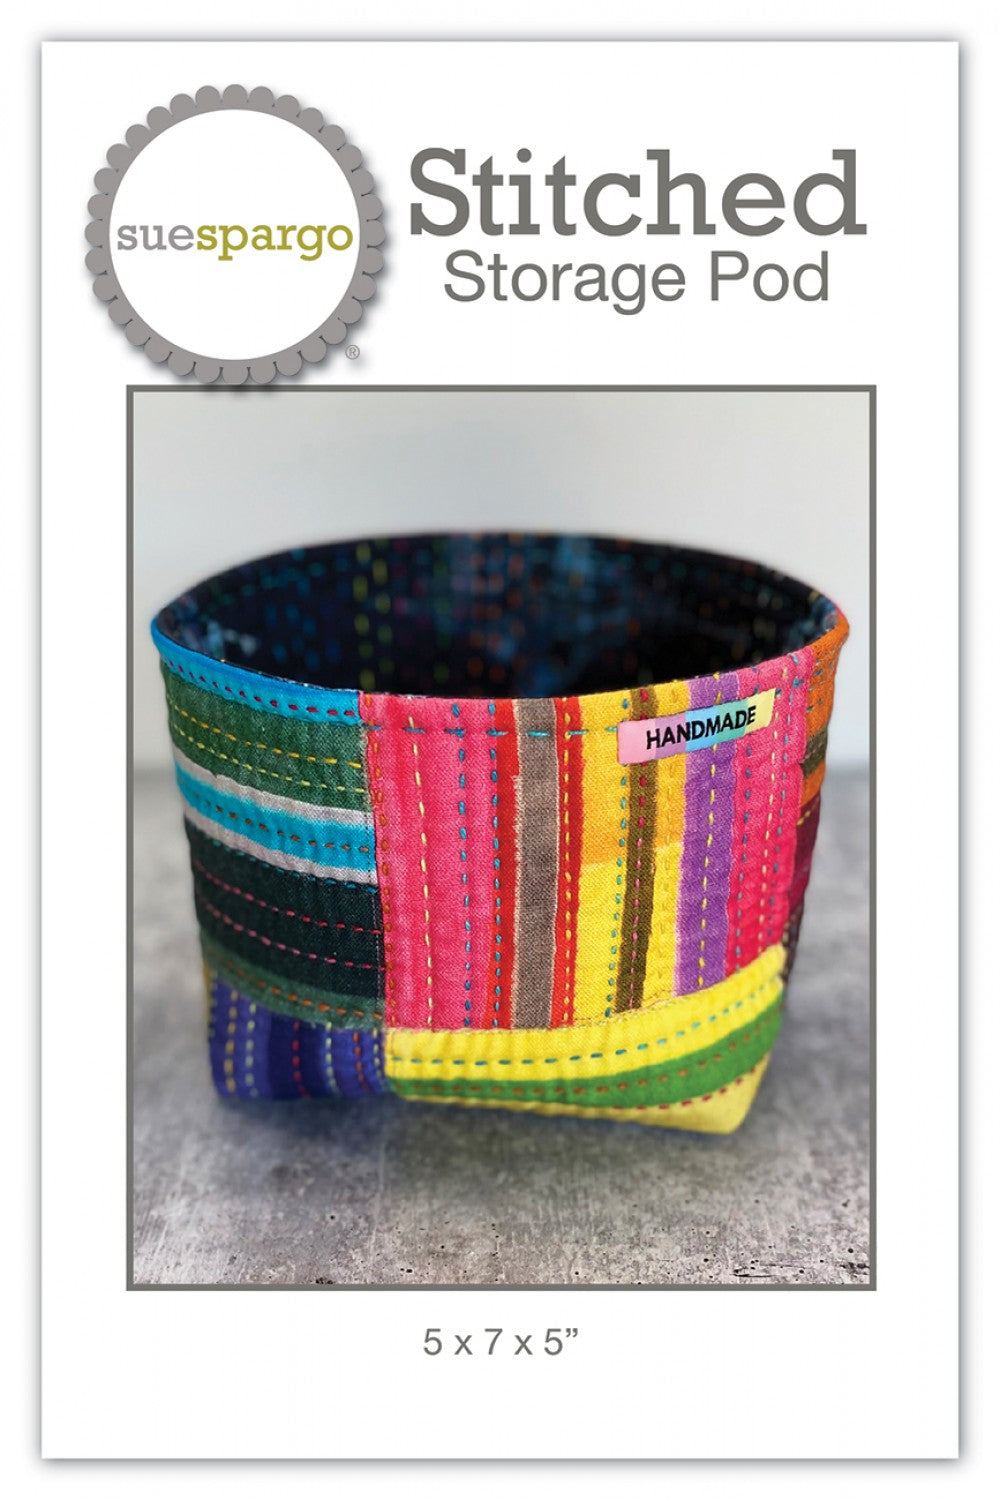 Stitched Storage Pod - Applique, Embroidery, and Sewing Pattern by Sue Spargo of Folk Art Quilts